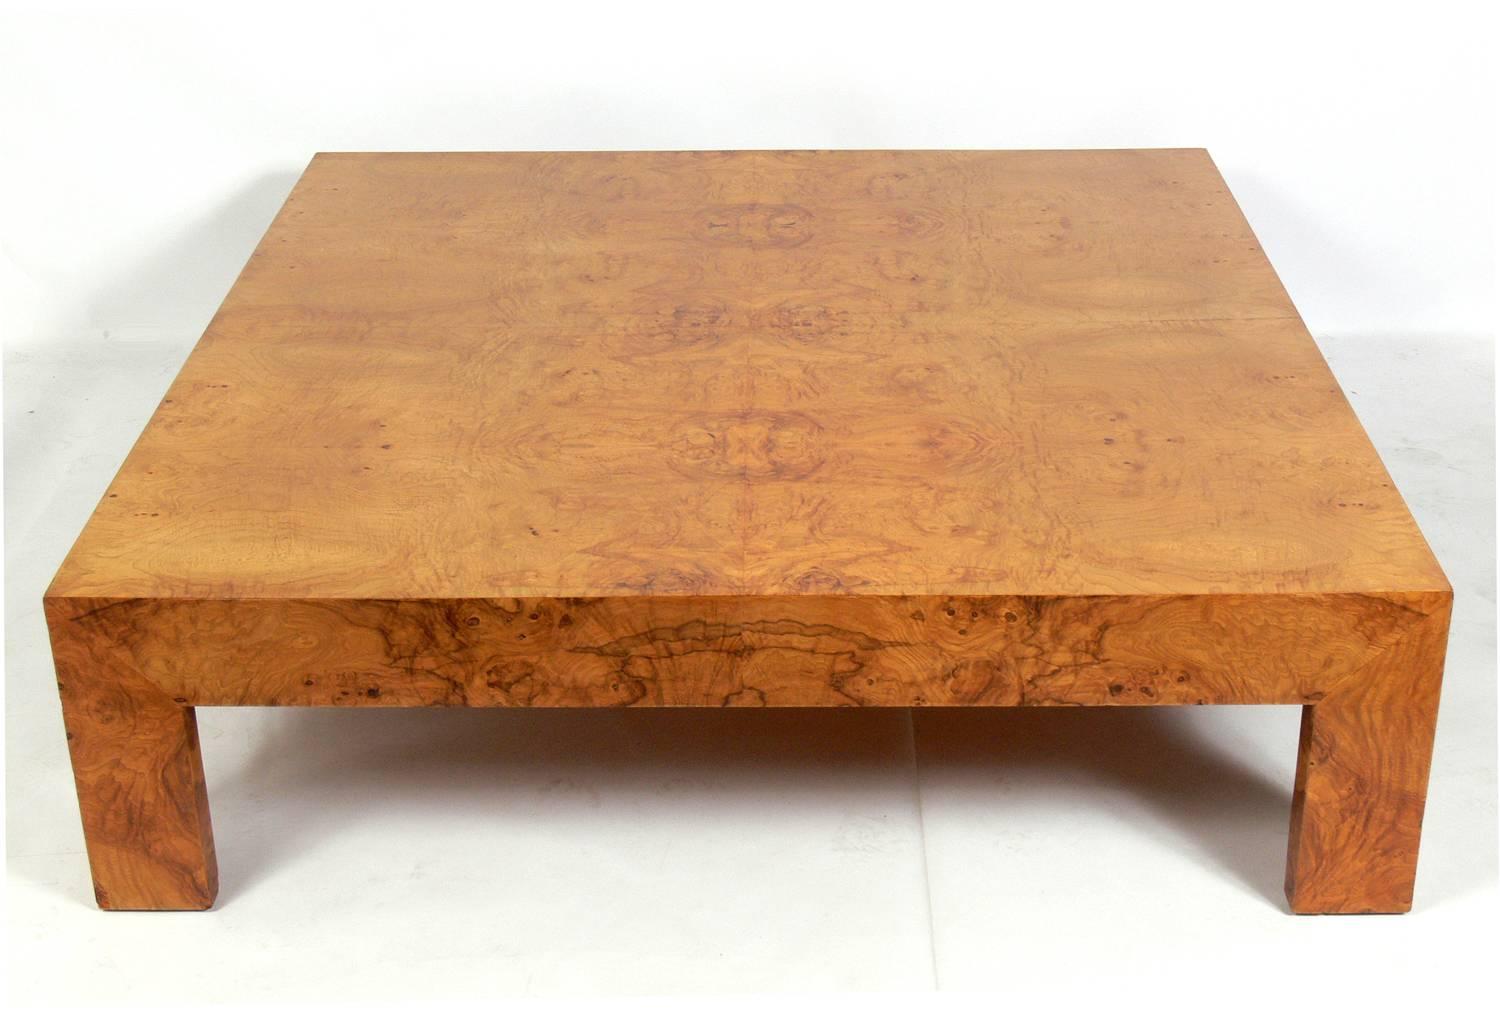 Large-scale burl wood coffee table designed by Milo Baughman, American, circa 1960s. It measures an impressive 54" length x 54" width x 15" height. Retains warm original patina.